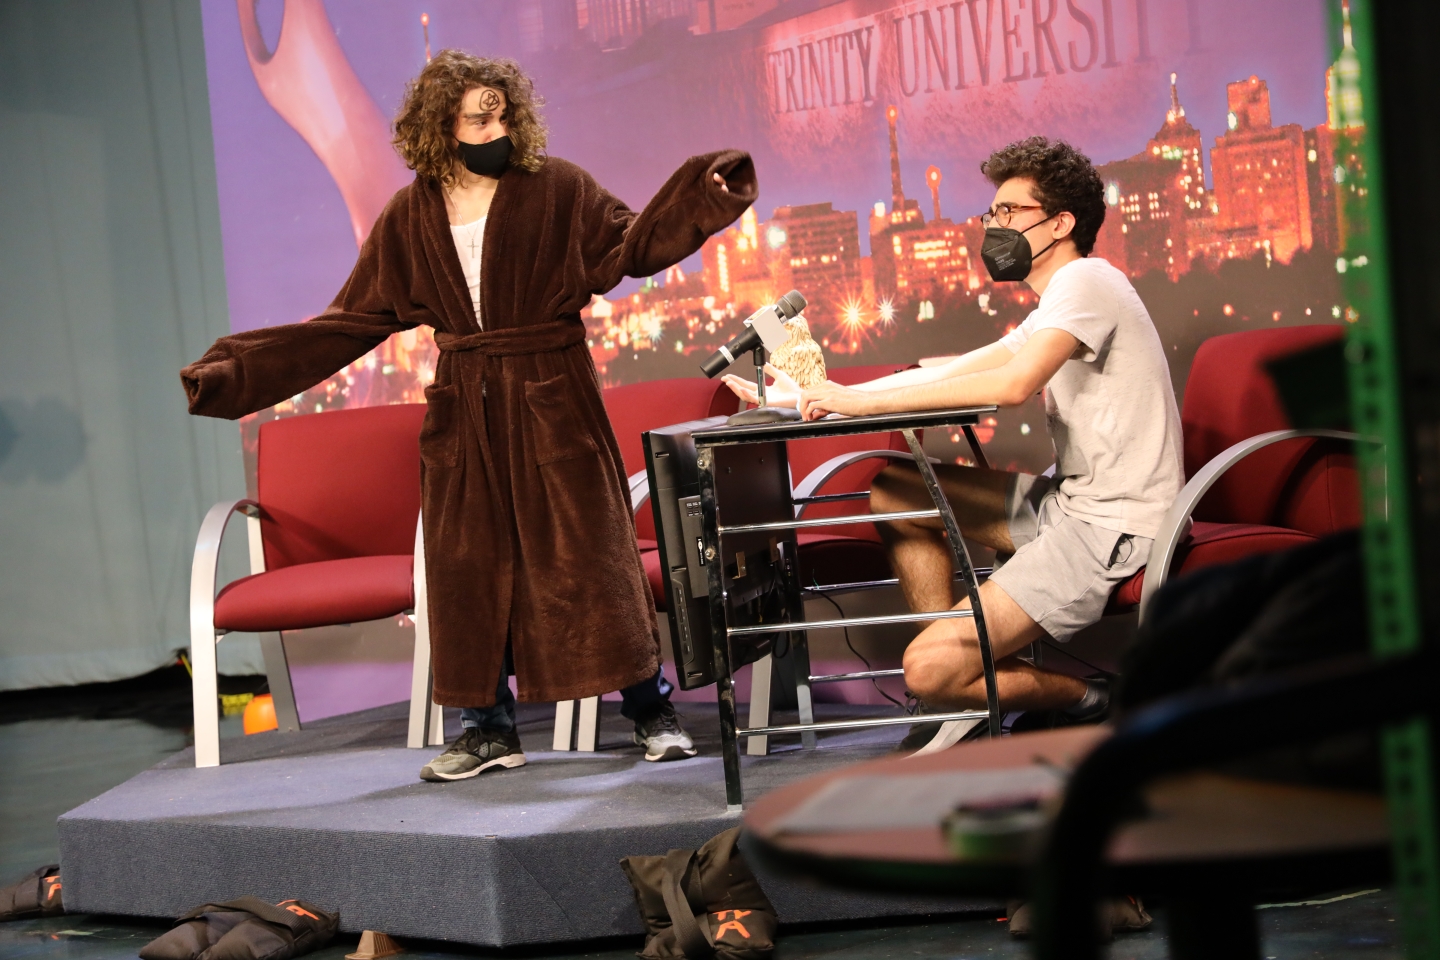 Two students on TigerTV set. Student on right sitting at a makeshift desk while student on left is wearing a robe and standing